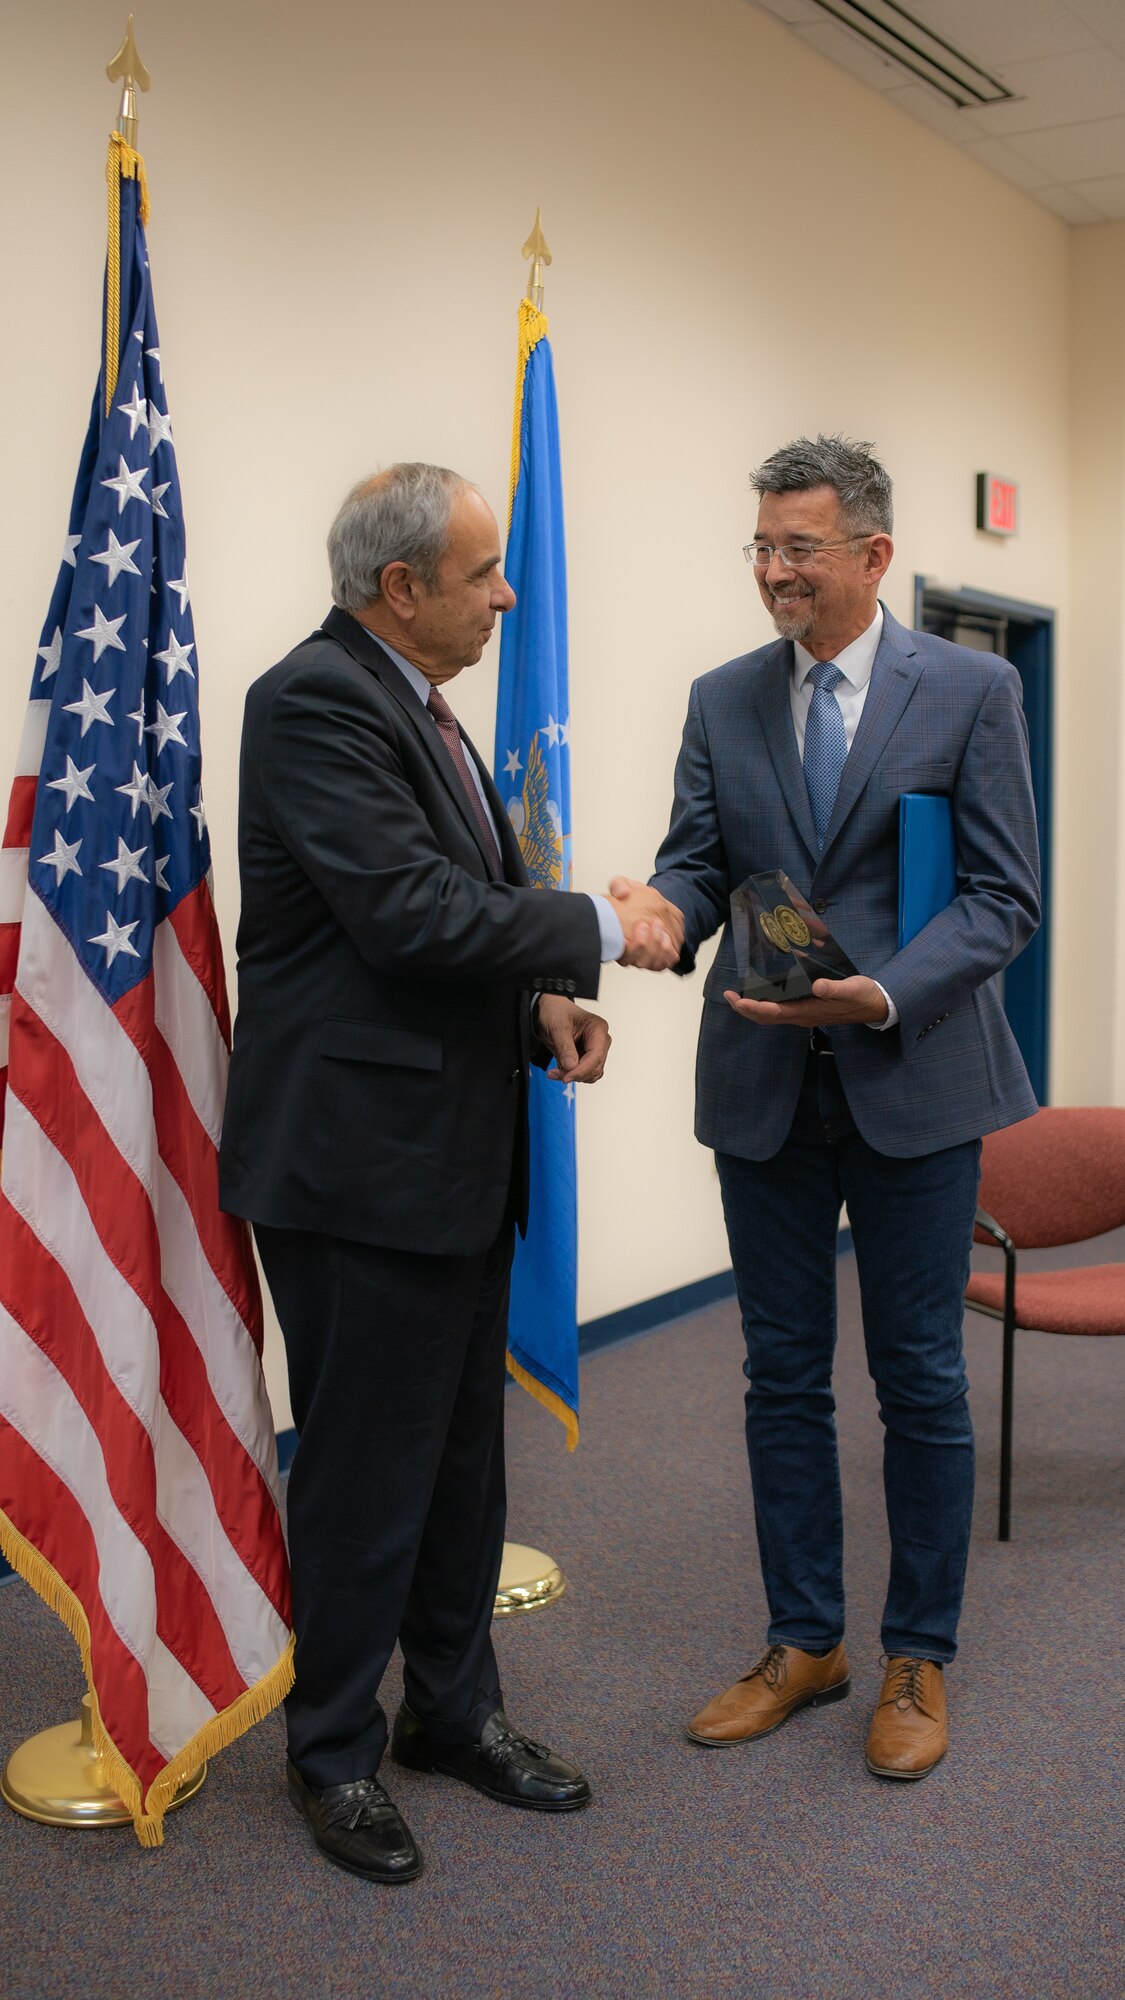 Dr. Richard Joseph Chief Scientist of the Air Force presents Air Force Research Laboratory scientist Dr. Robert Johnson the 2018 Harold Brown Award in a ceremony at AFRL's Starfire Optical Range on Nov. 21, 2019. (U.S. Air Force photo/ Macee Hunt)